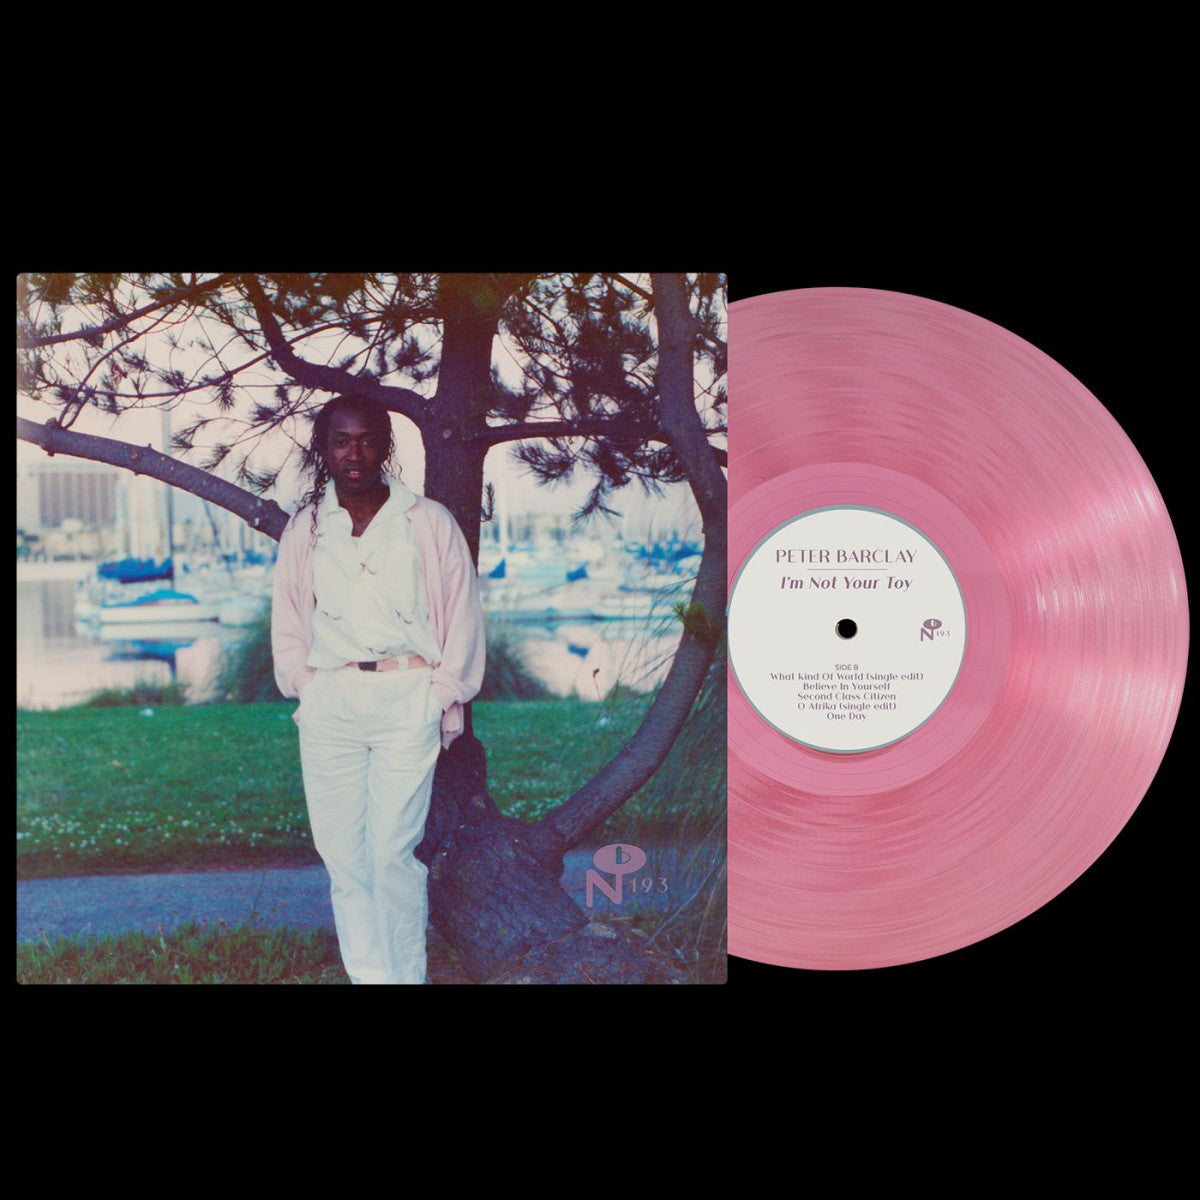 Peter Barclay – I'm Not Your Toy LP LTD Pink Vinyl